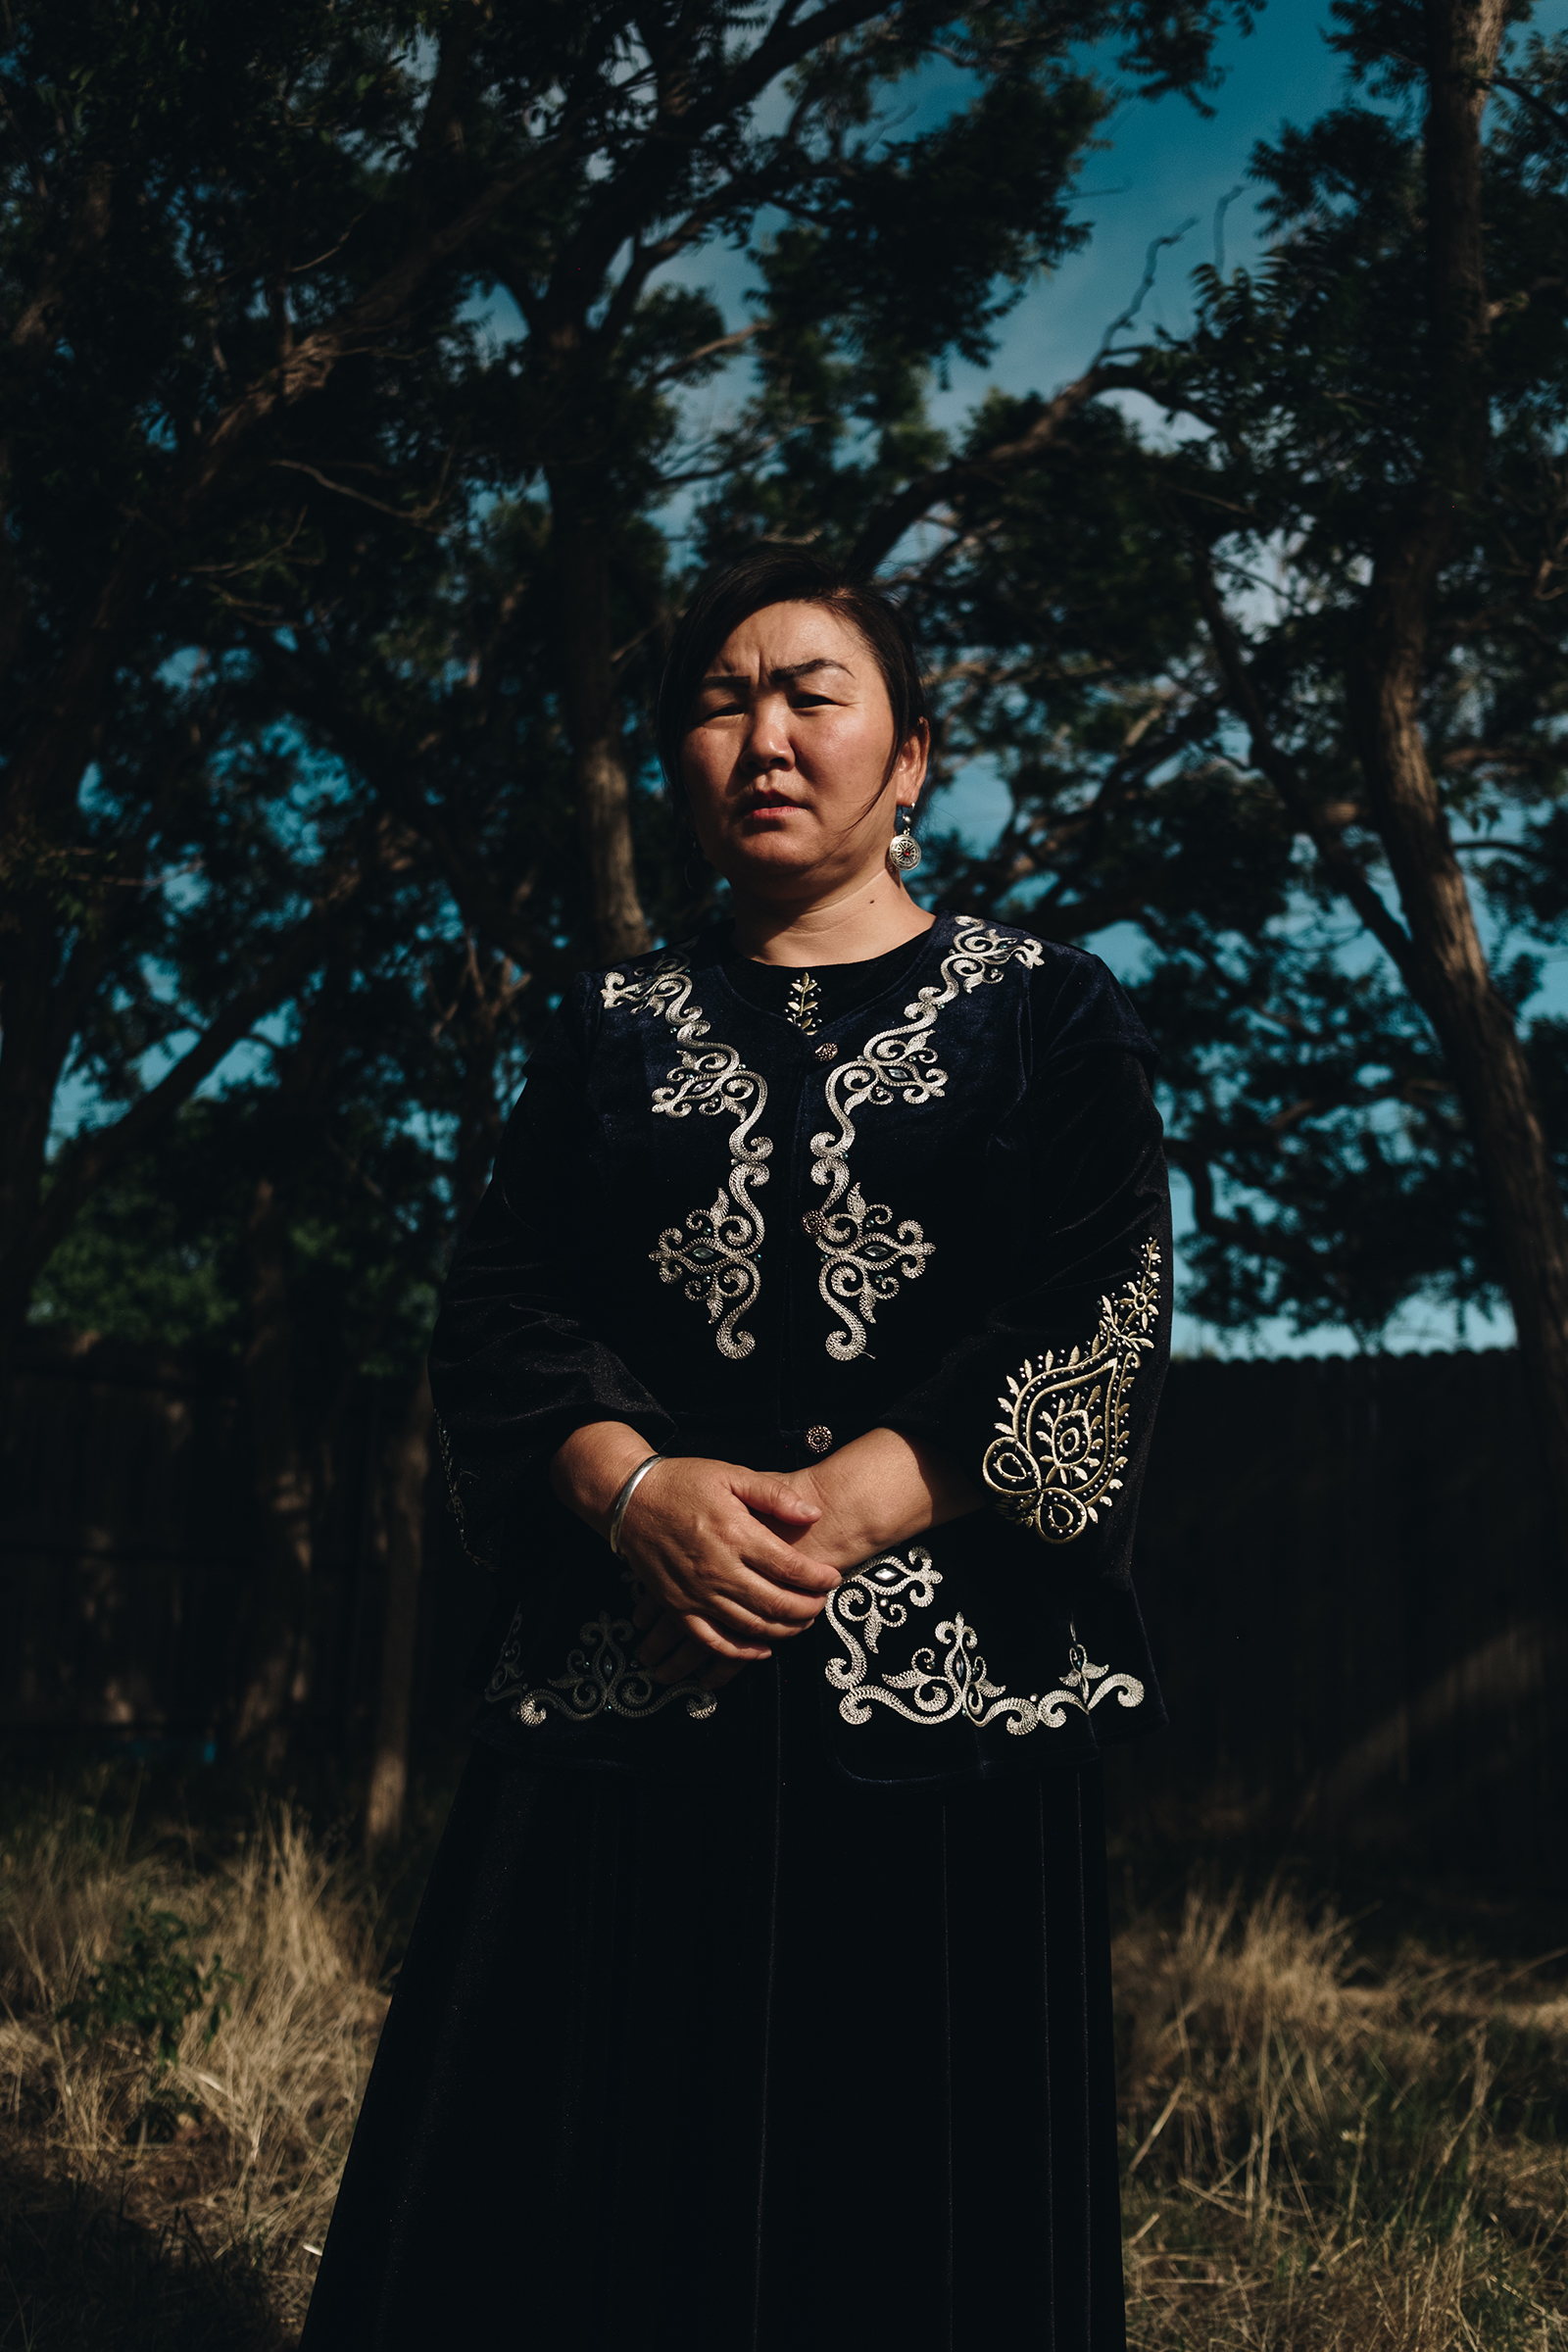 Gulzira Auelkhan, a survivor of the notorious “re-education centers” in Xinjiang, China (Khadija Farah for TIME)